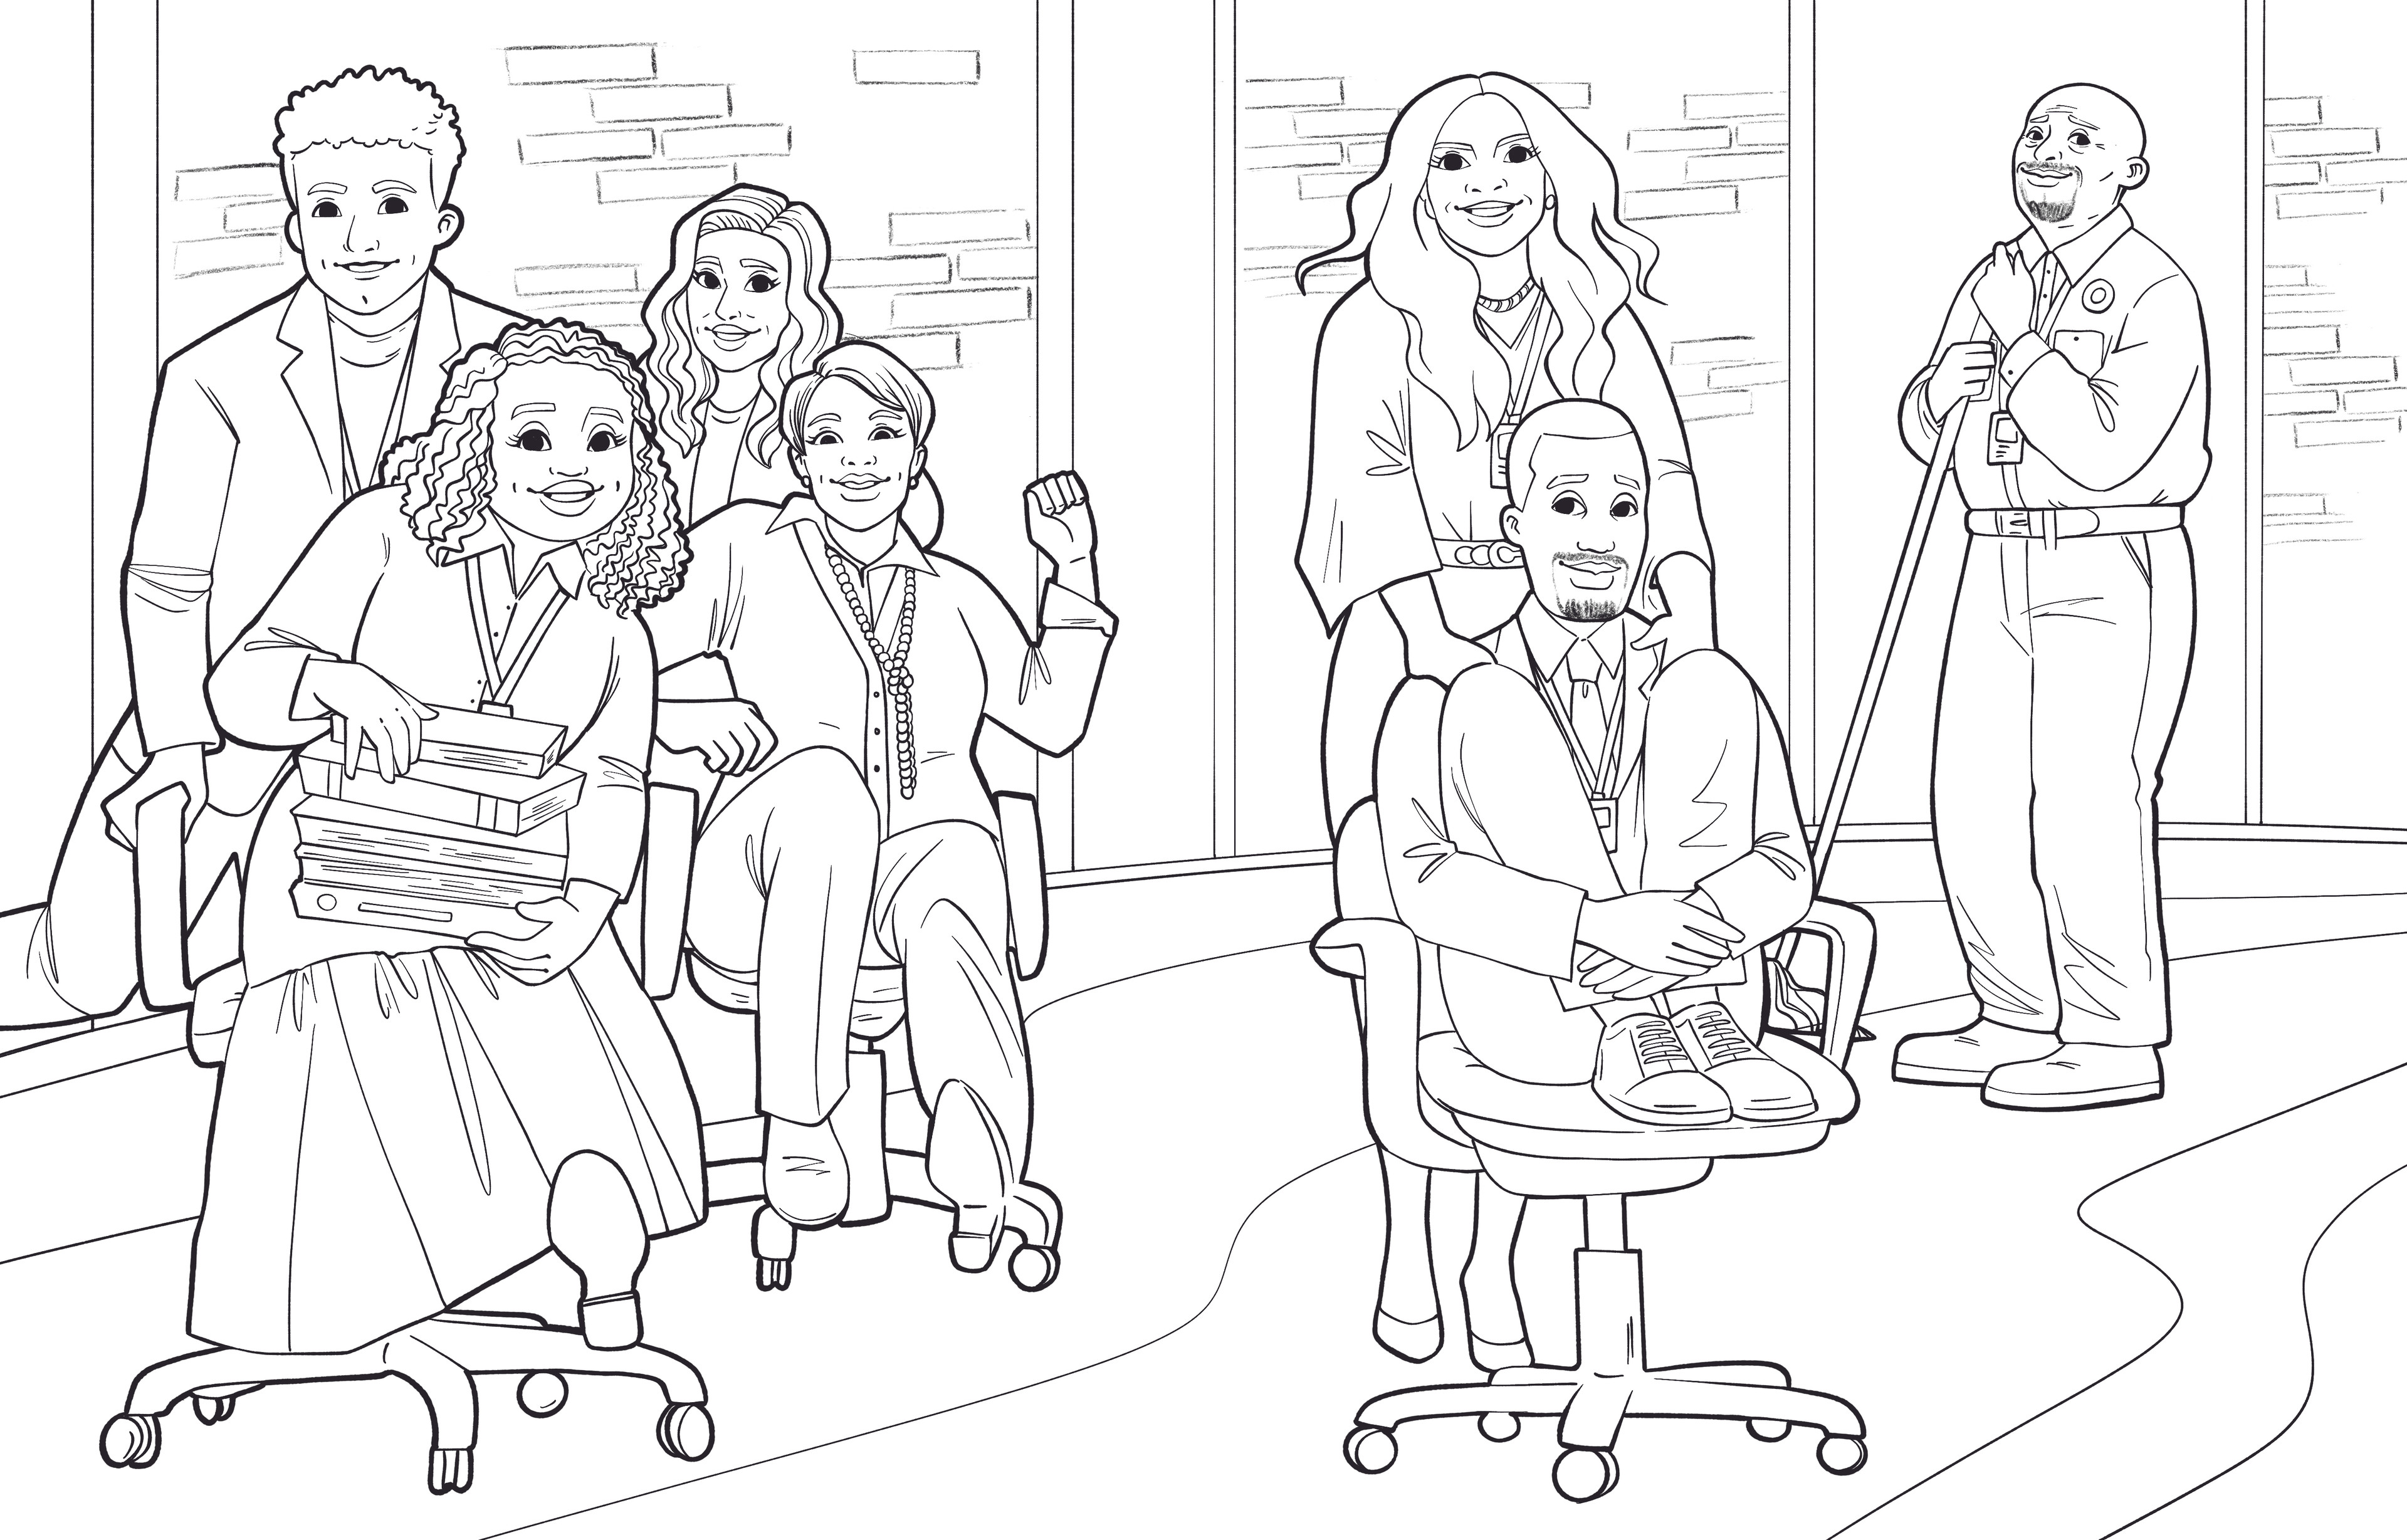 The Official Abbott Elementary Coloring Book: Sample Spread 3